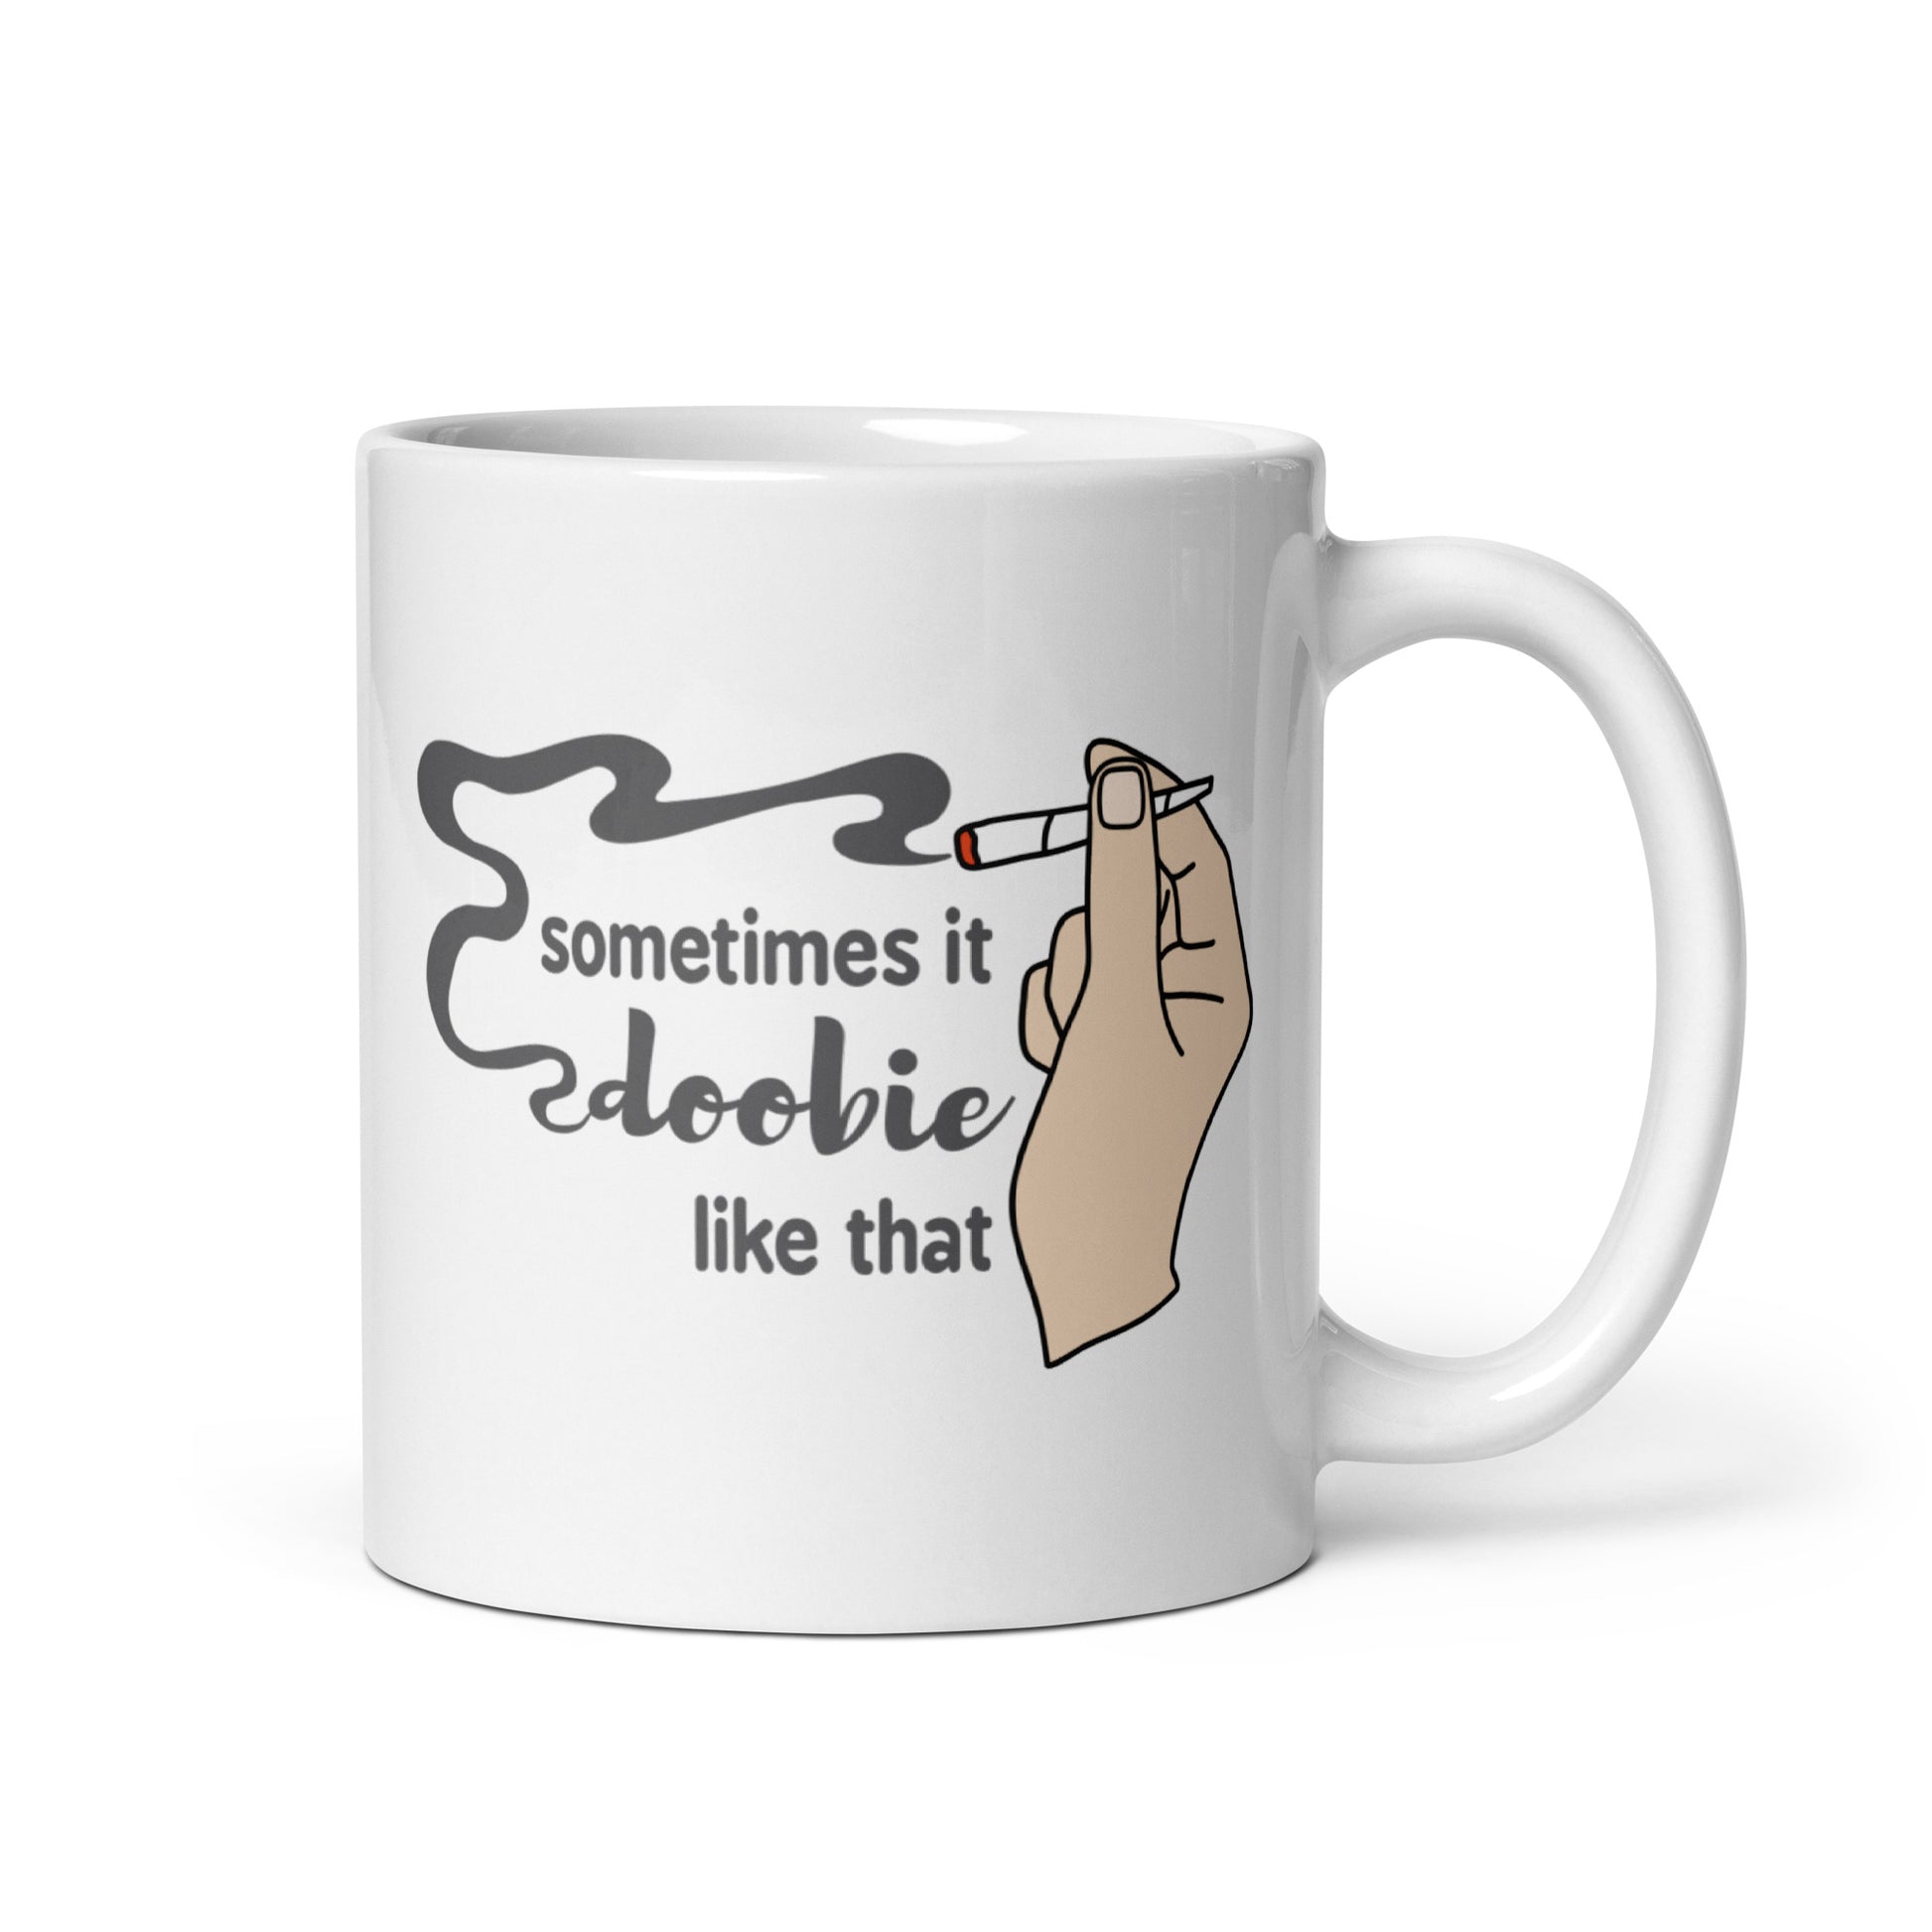 A white 11 ounce ceramic coffee cup featuring an illustration of a hand with light skin holding a joint. Text alongside the hand reads "sometimes it doobie like that" with the word "doobie" made from smoke from the joint.